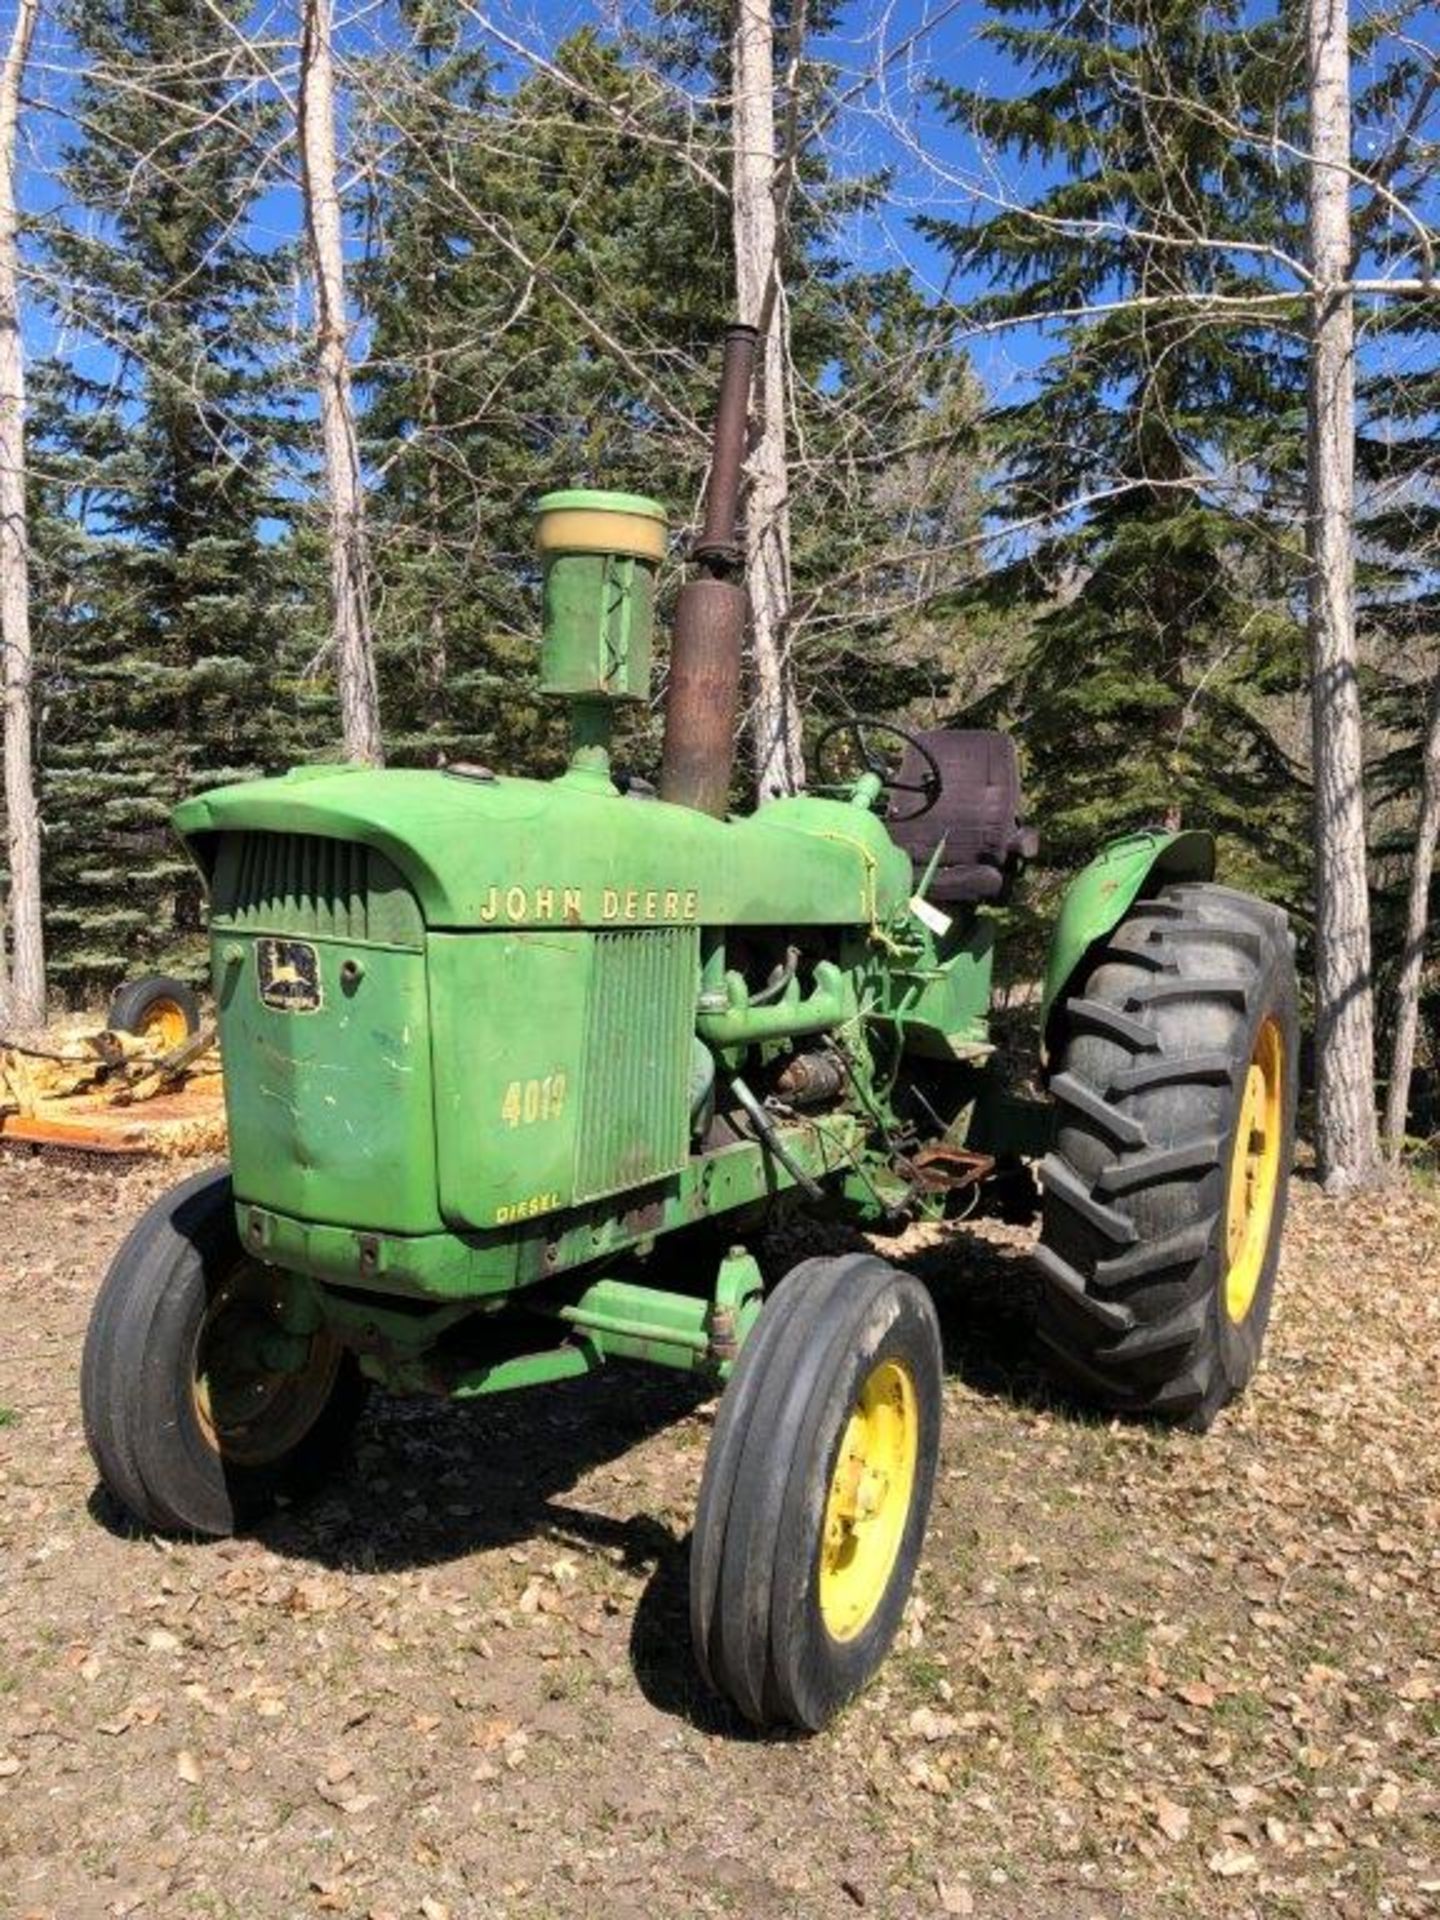 JOHN DEERE 4010 TRACTOR, DIESEL, 2WD, 18.4-34 R1 RUBBER (GOOD CONDITION), 540 PTO, S/N 401022T3600 - Image 3 of 14